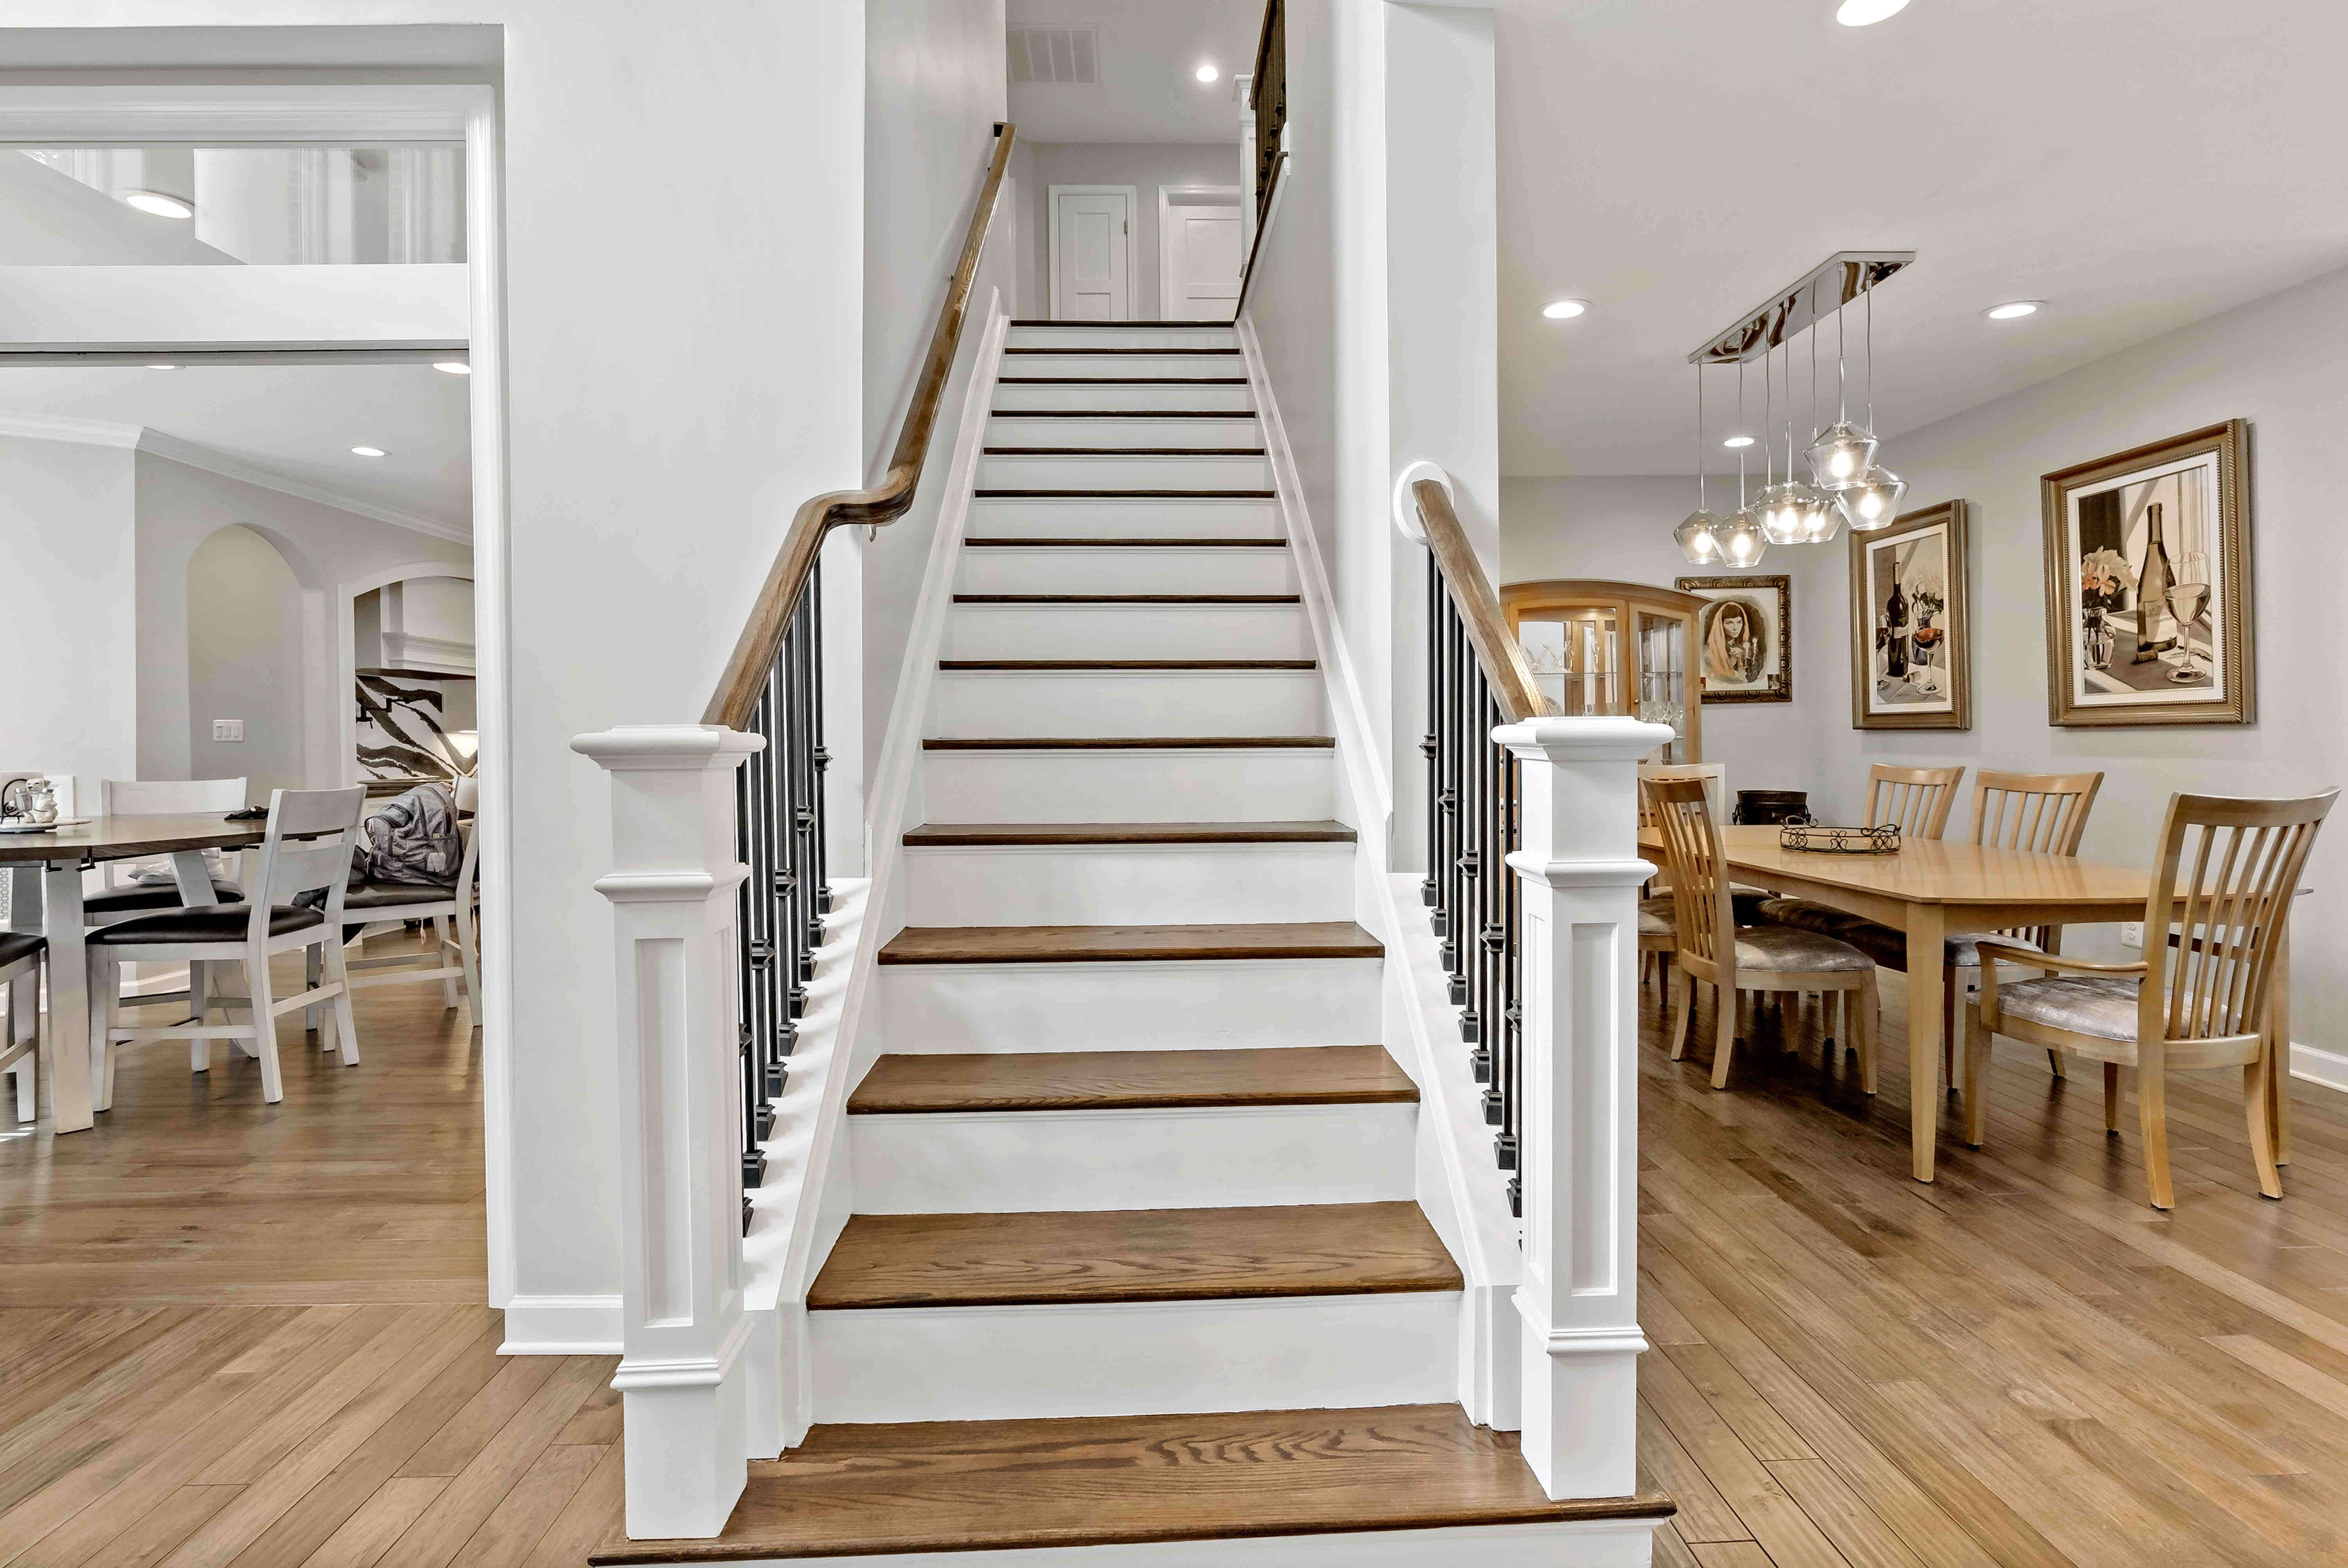 Wooden staircase white and brown in center of home